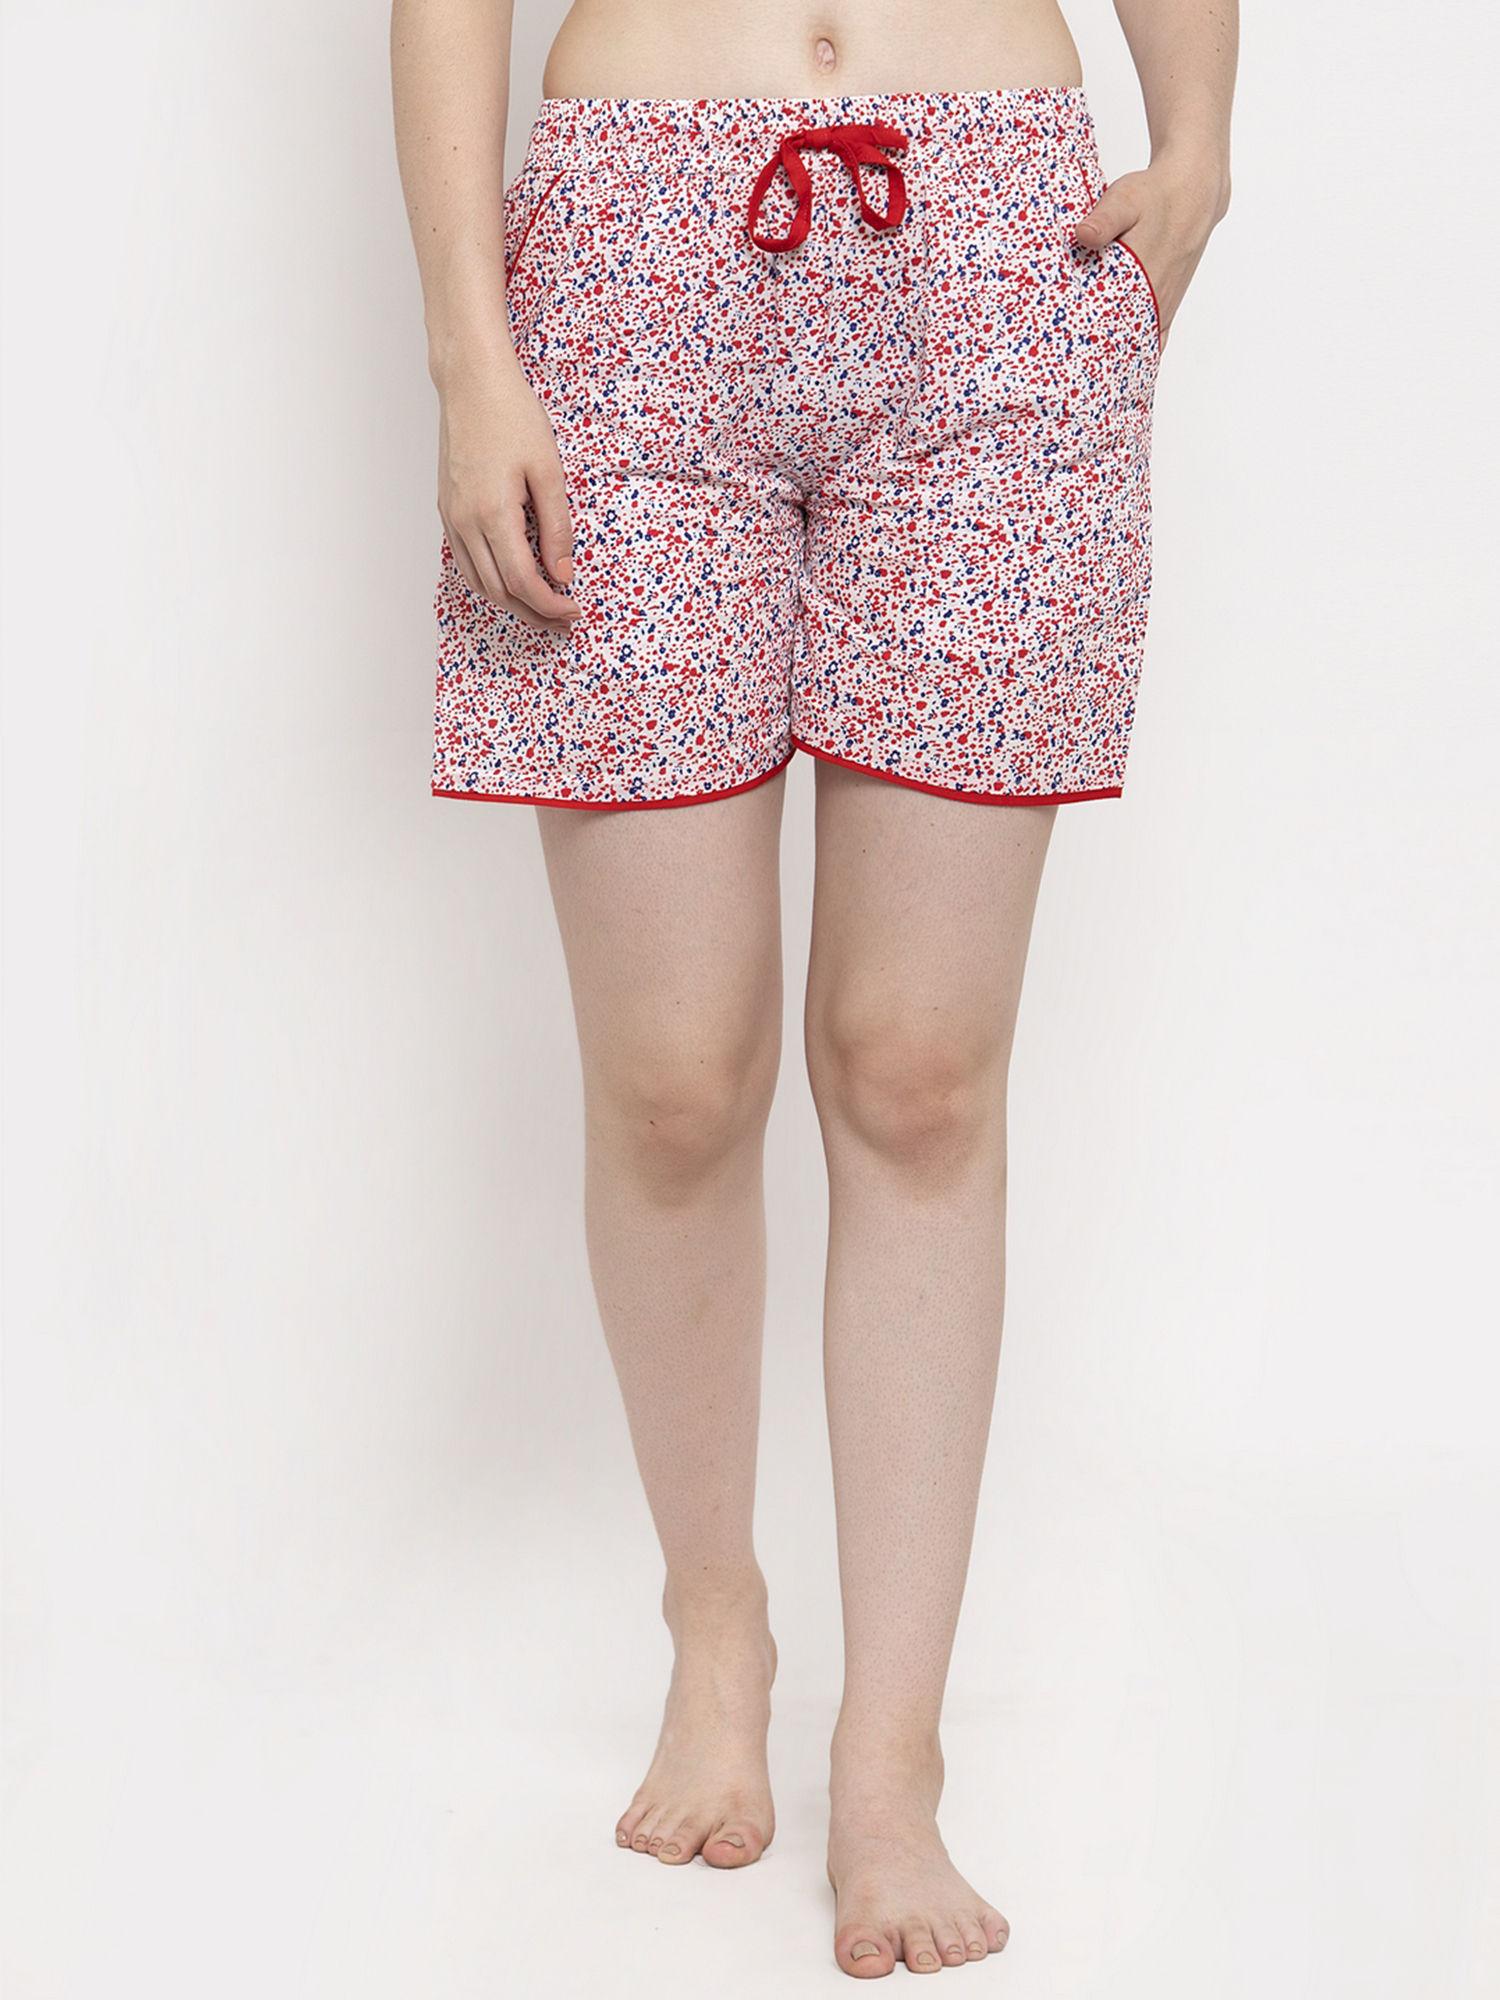 women's red cotton printed shorts